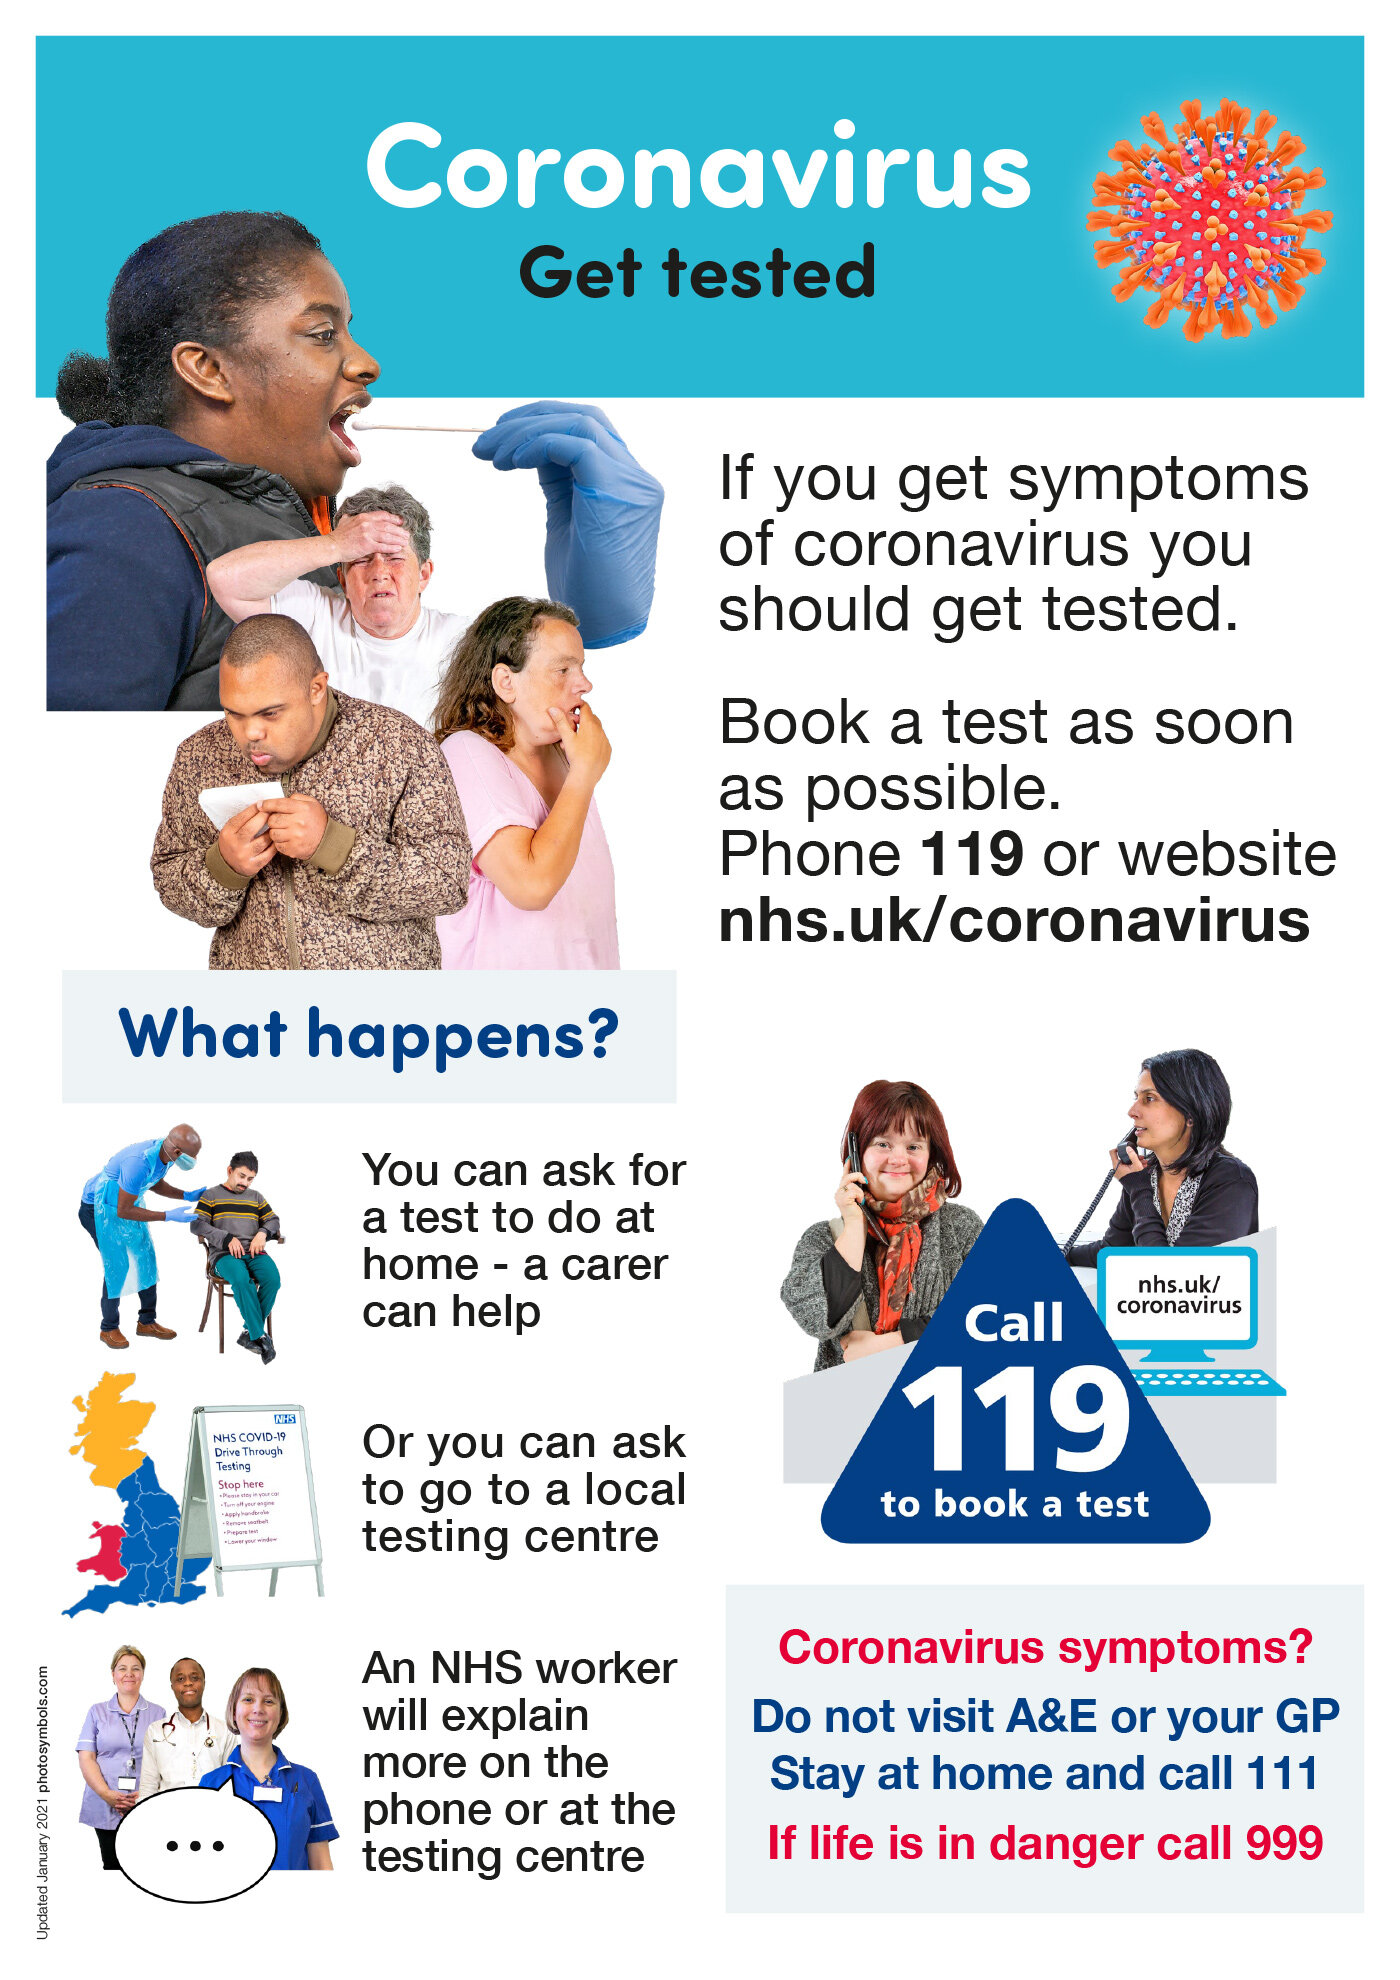 MyAnimeList.net - Keep yourself safe from coronavirus with these easy  instructions🙅‍♀️